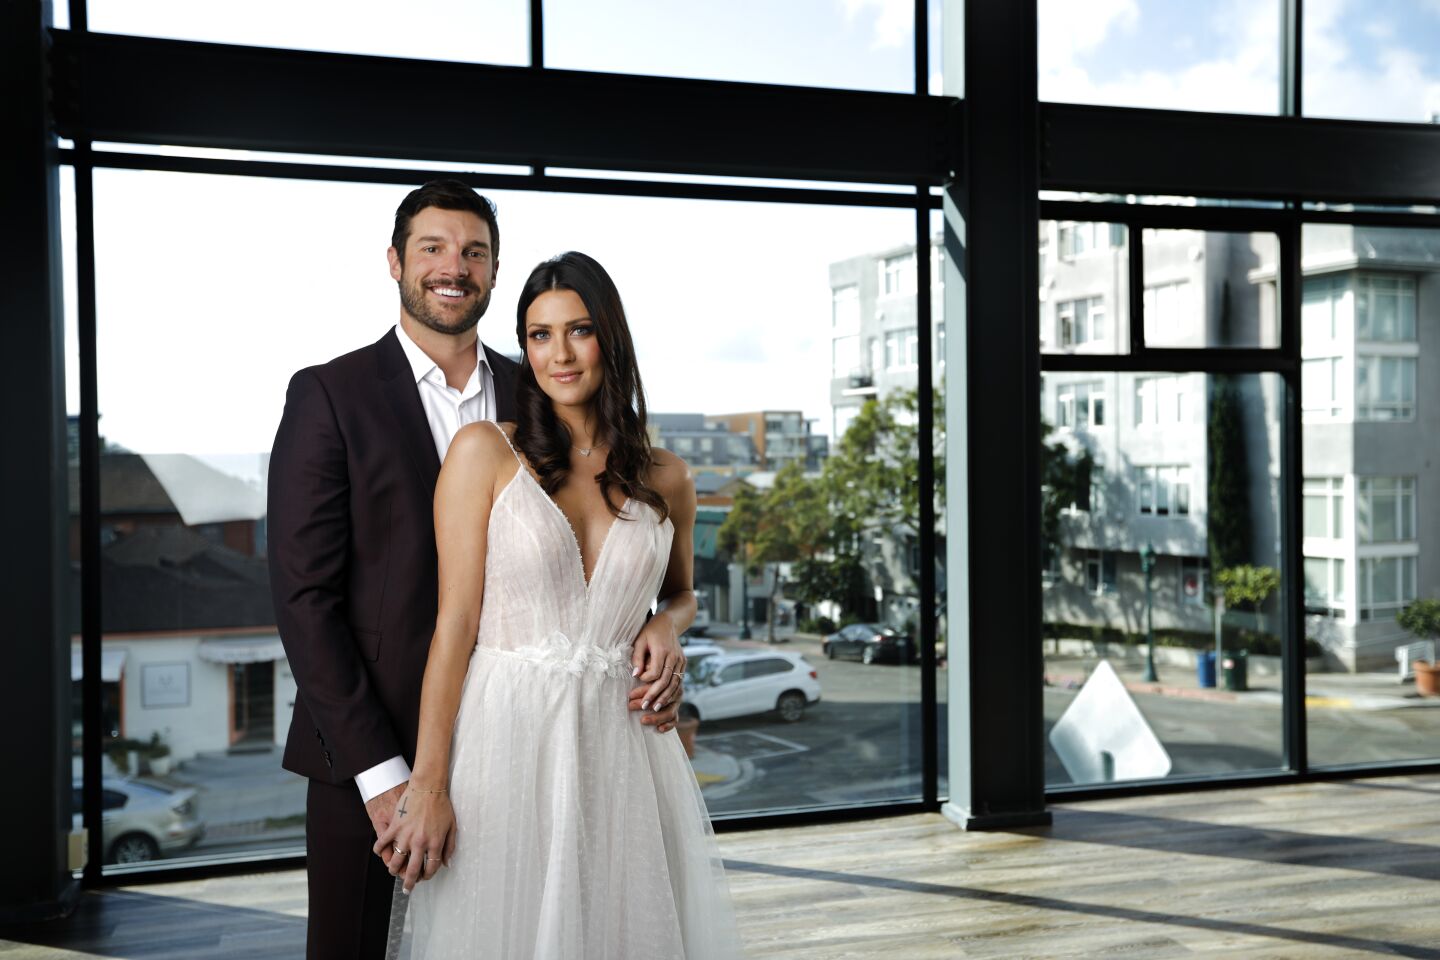 THEY DO: Becca Kufrin and Garret Yrigoyen practice for their future wedding by posing in bridal inspired clothing at the Porto Vista Hotel. On Becca: Flora dress, The Dress Theory, thedresstheory.com; Ari necklace and Zorte hair clip, Kendra Scott, kendrascott.com. On Garrett: Astian suit, Hugo Boss, Irving shirt, Theory, bloomingdales.com; sneakers by Gola, golausa.com.